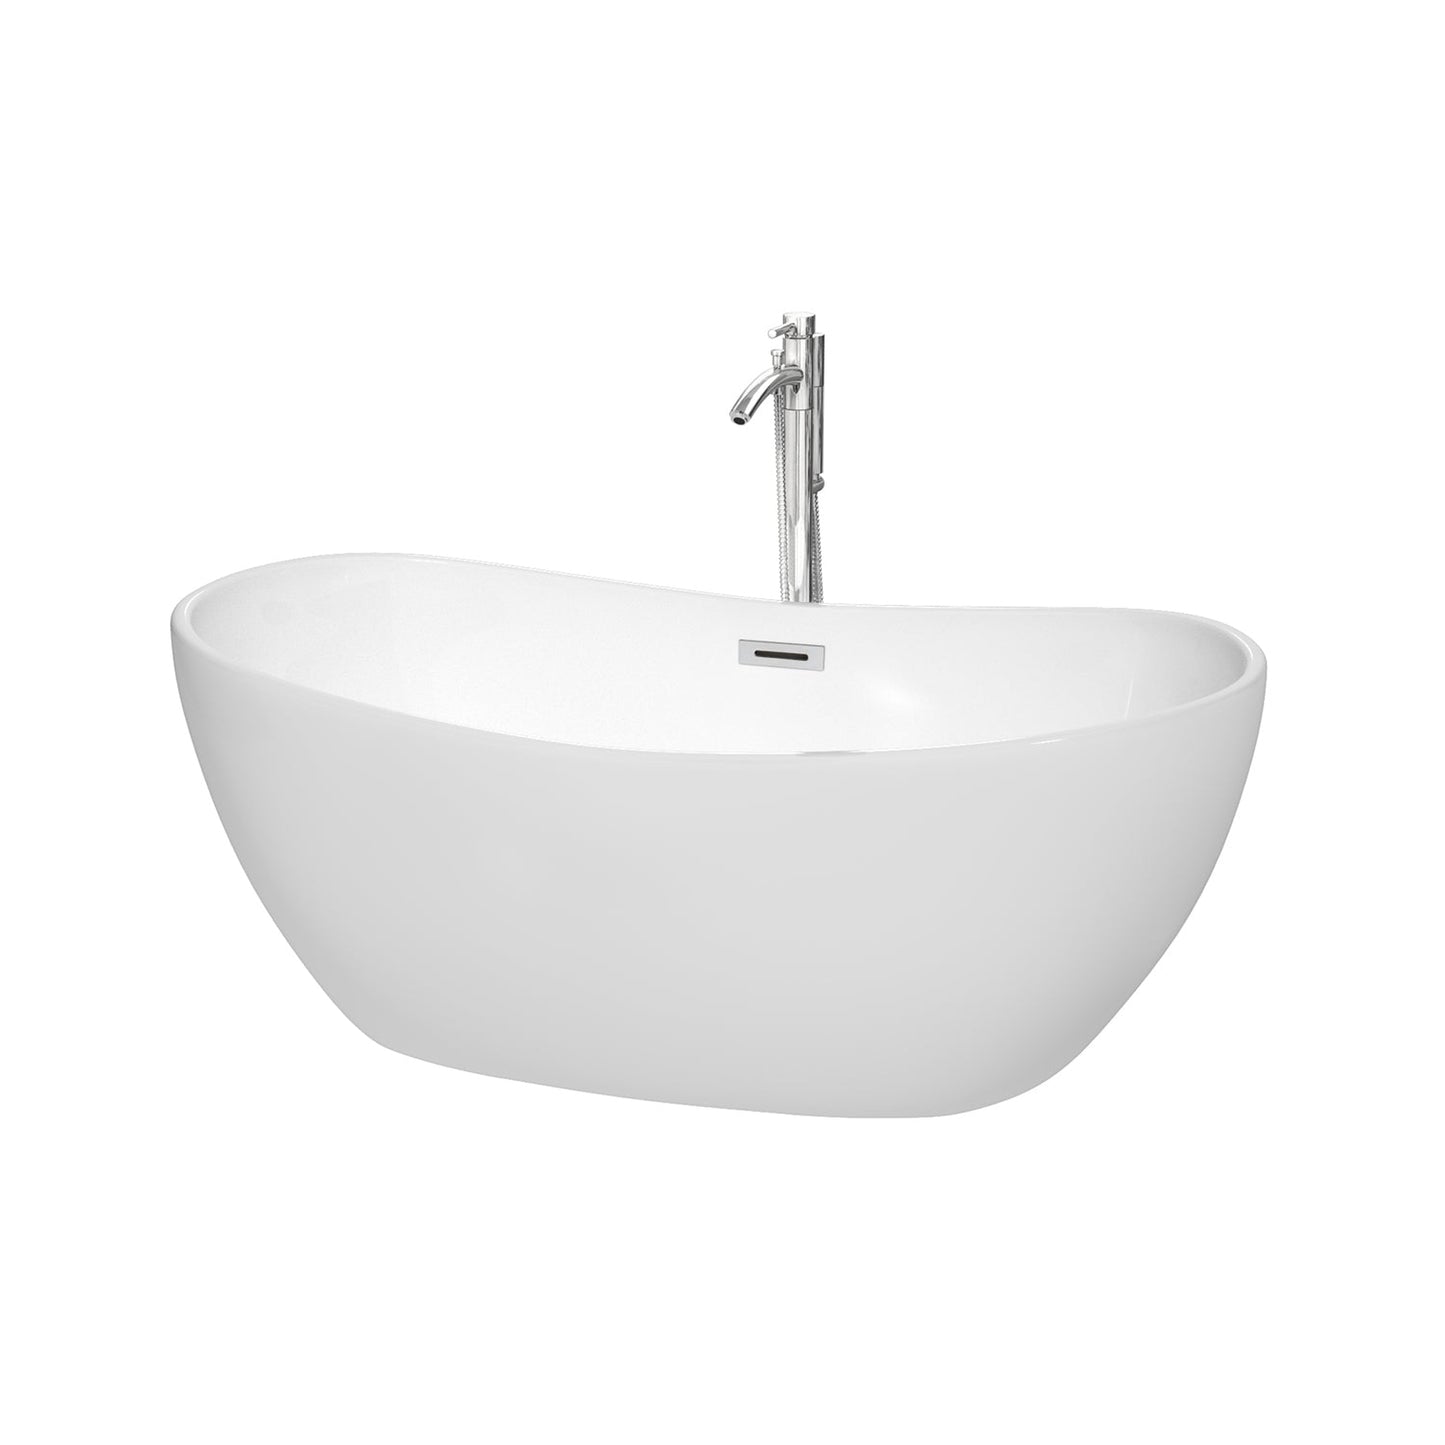 Wyndham Collection Rebecca 60" Freestanding Bathtub in White With Floor Mounted Faucet, Drain and Overflow Trim in Polished Chrome